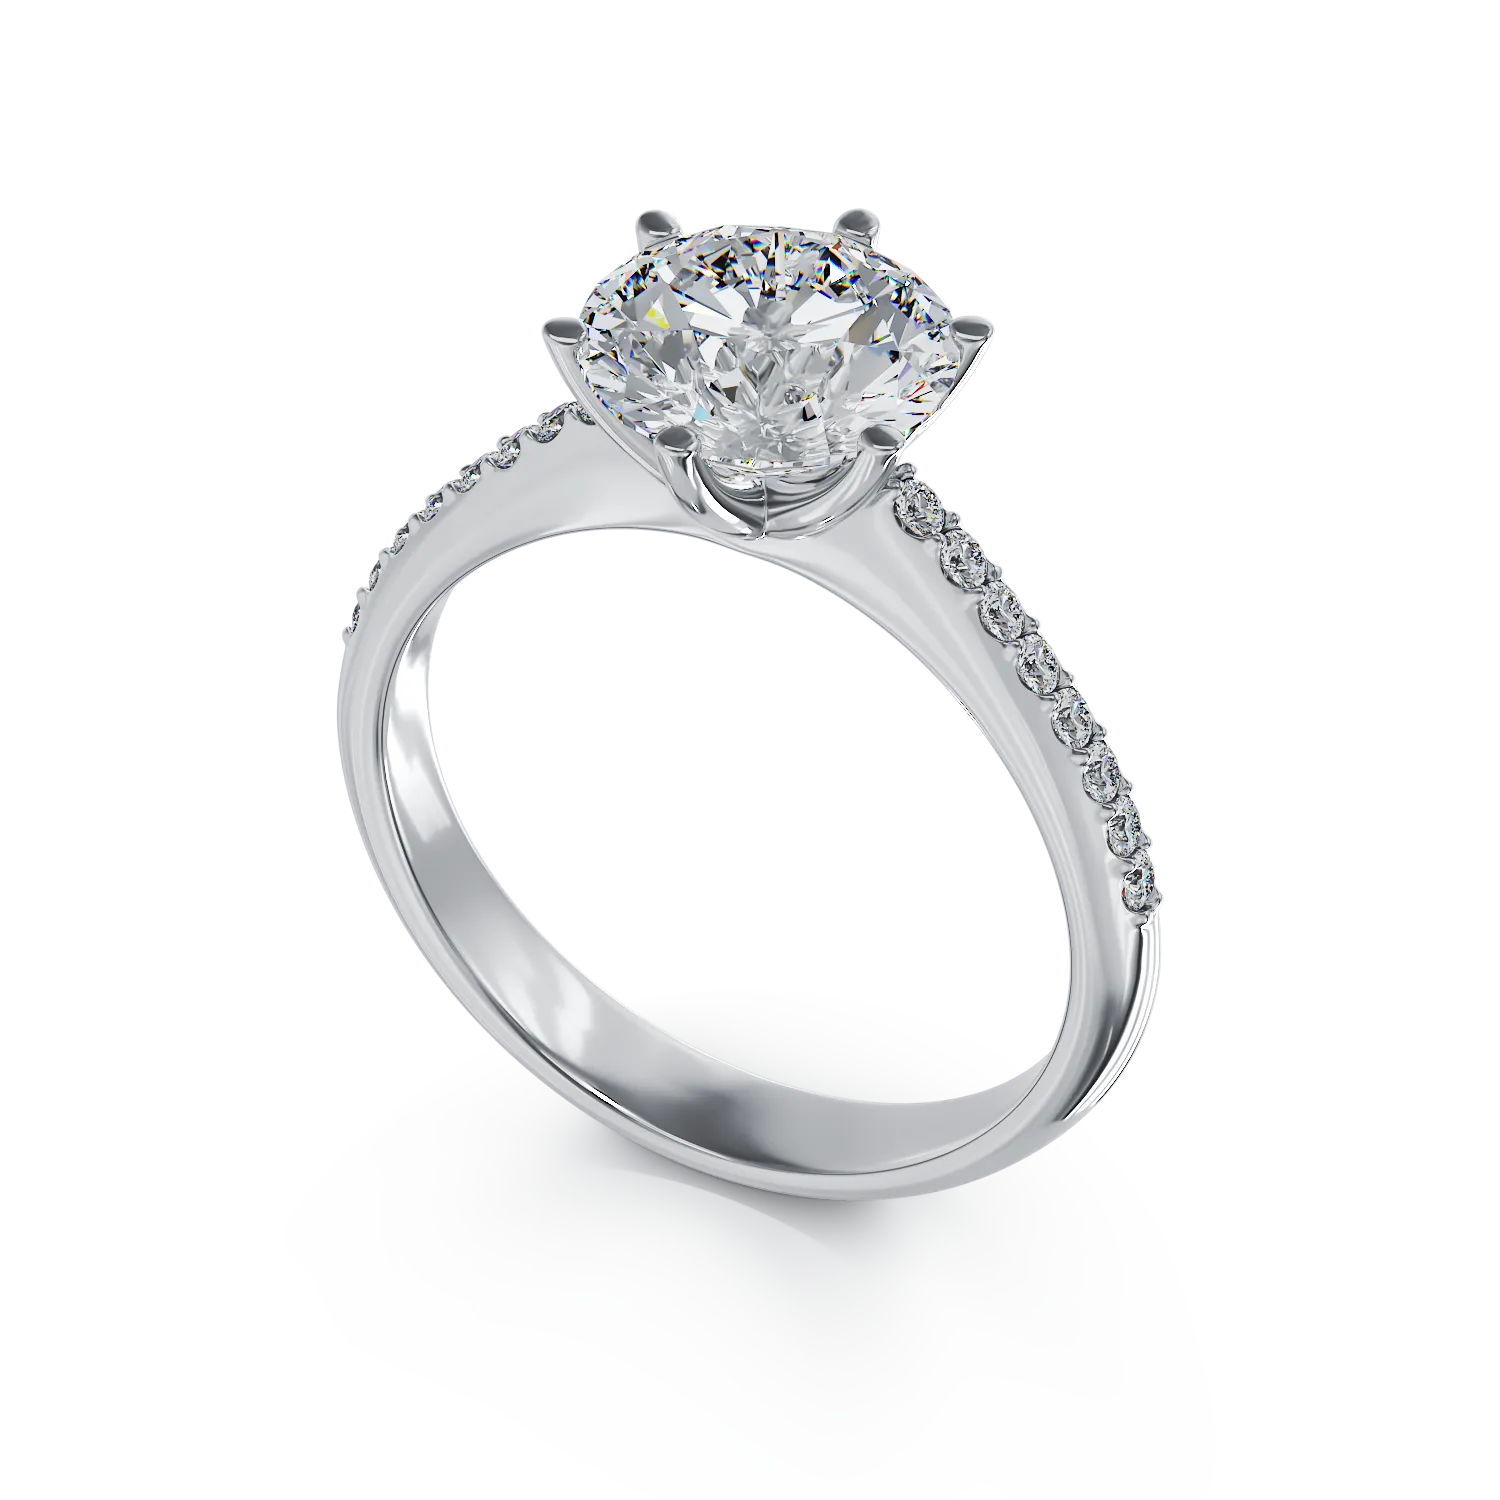 White gold engagement ring with a 2.01ct diamond and 0.14ct diamonds